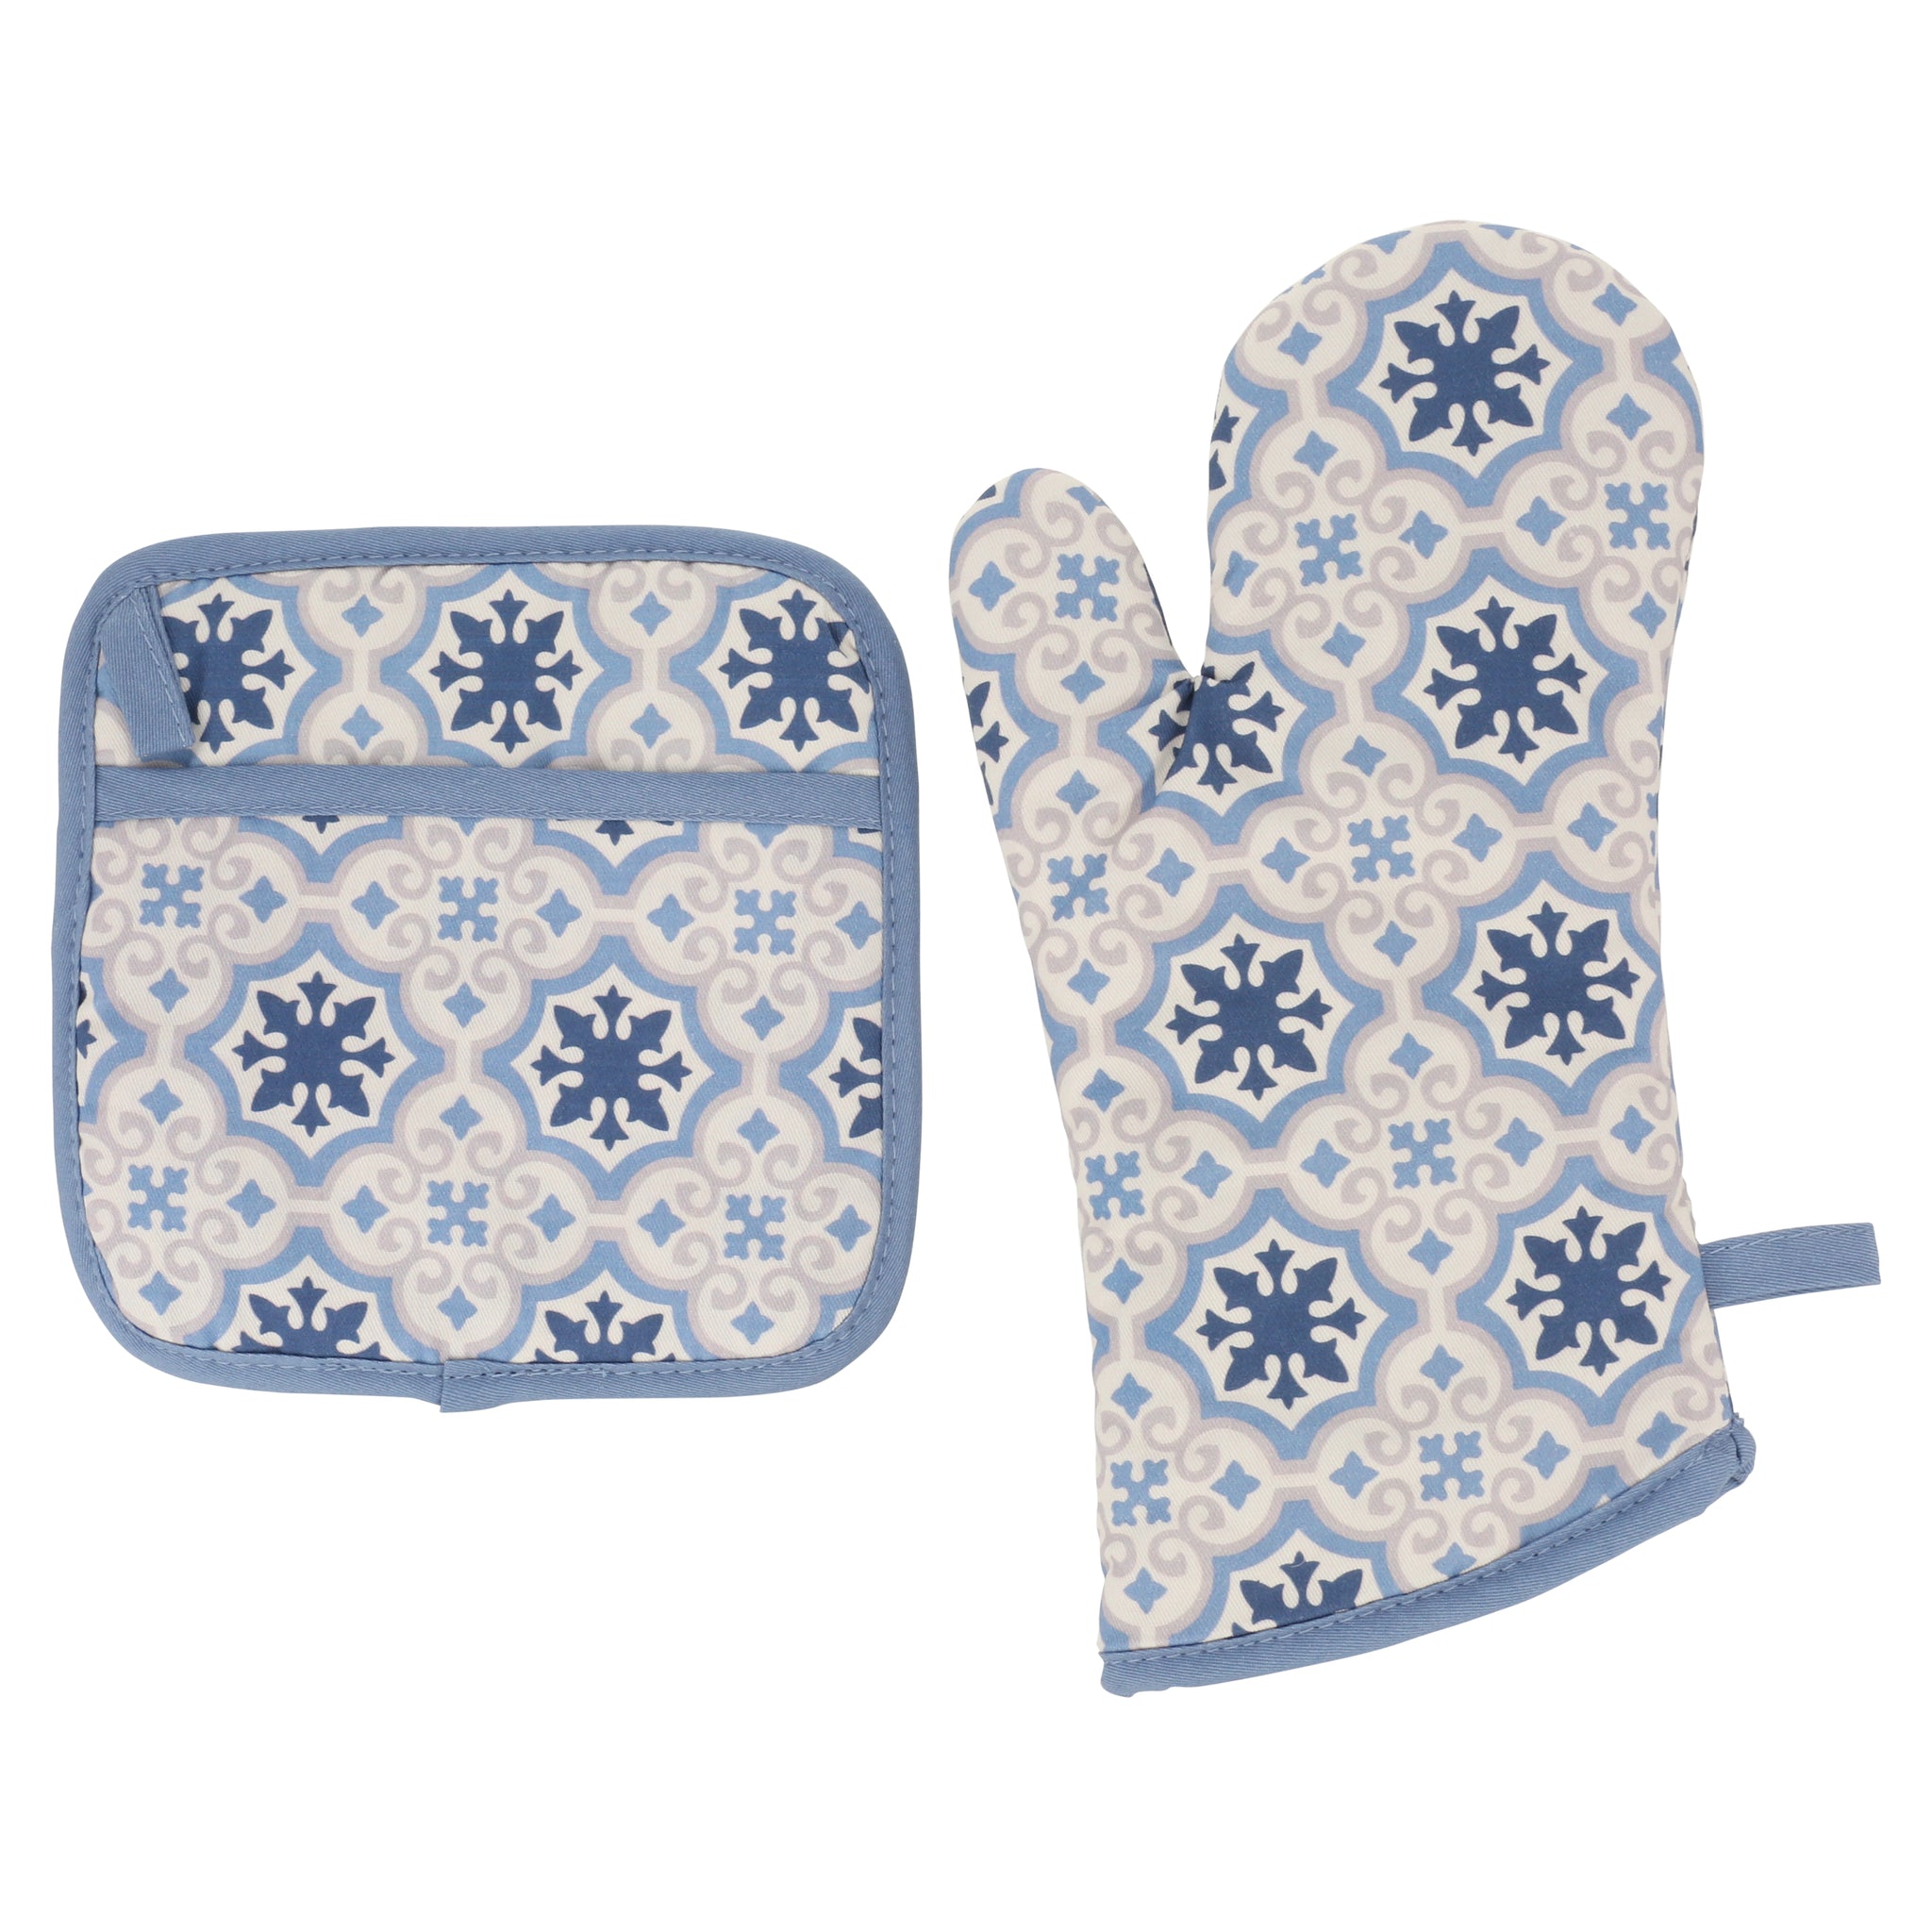 Nora Blue Mitten and Potholder Combo